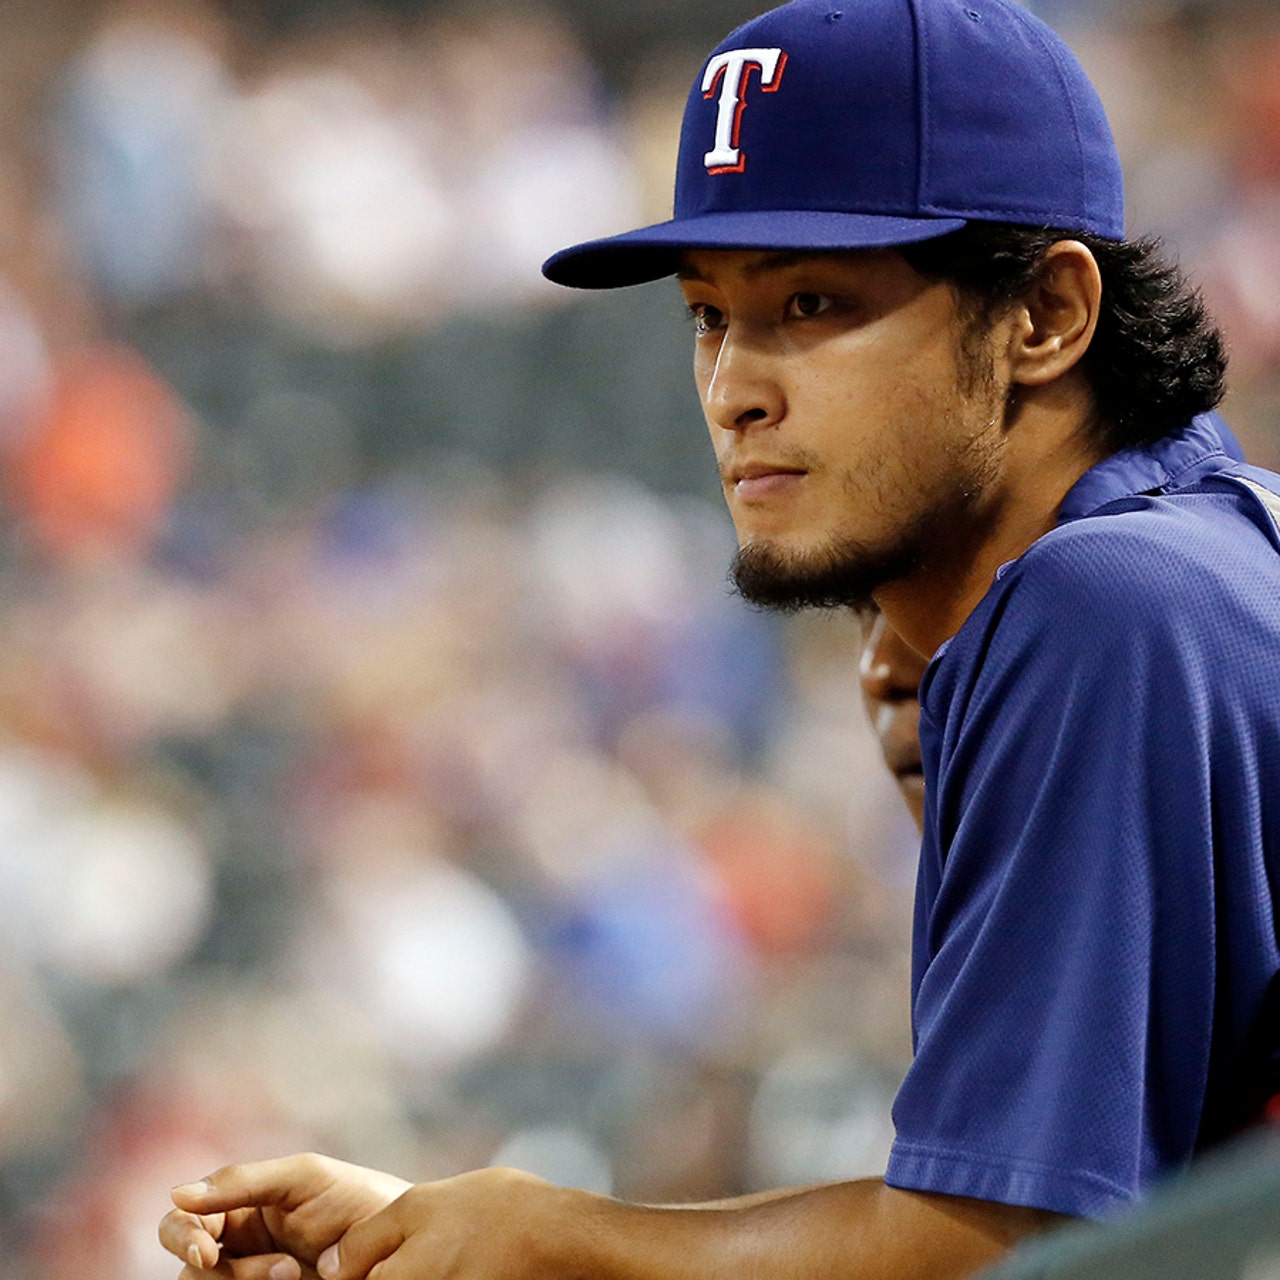 Rangers say Darvish won't pitch again this year